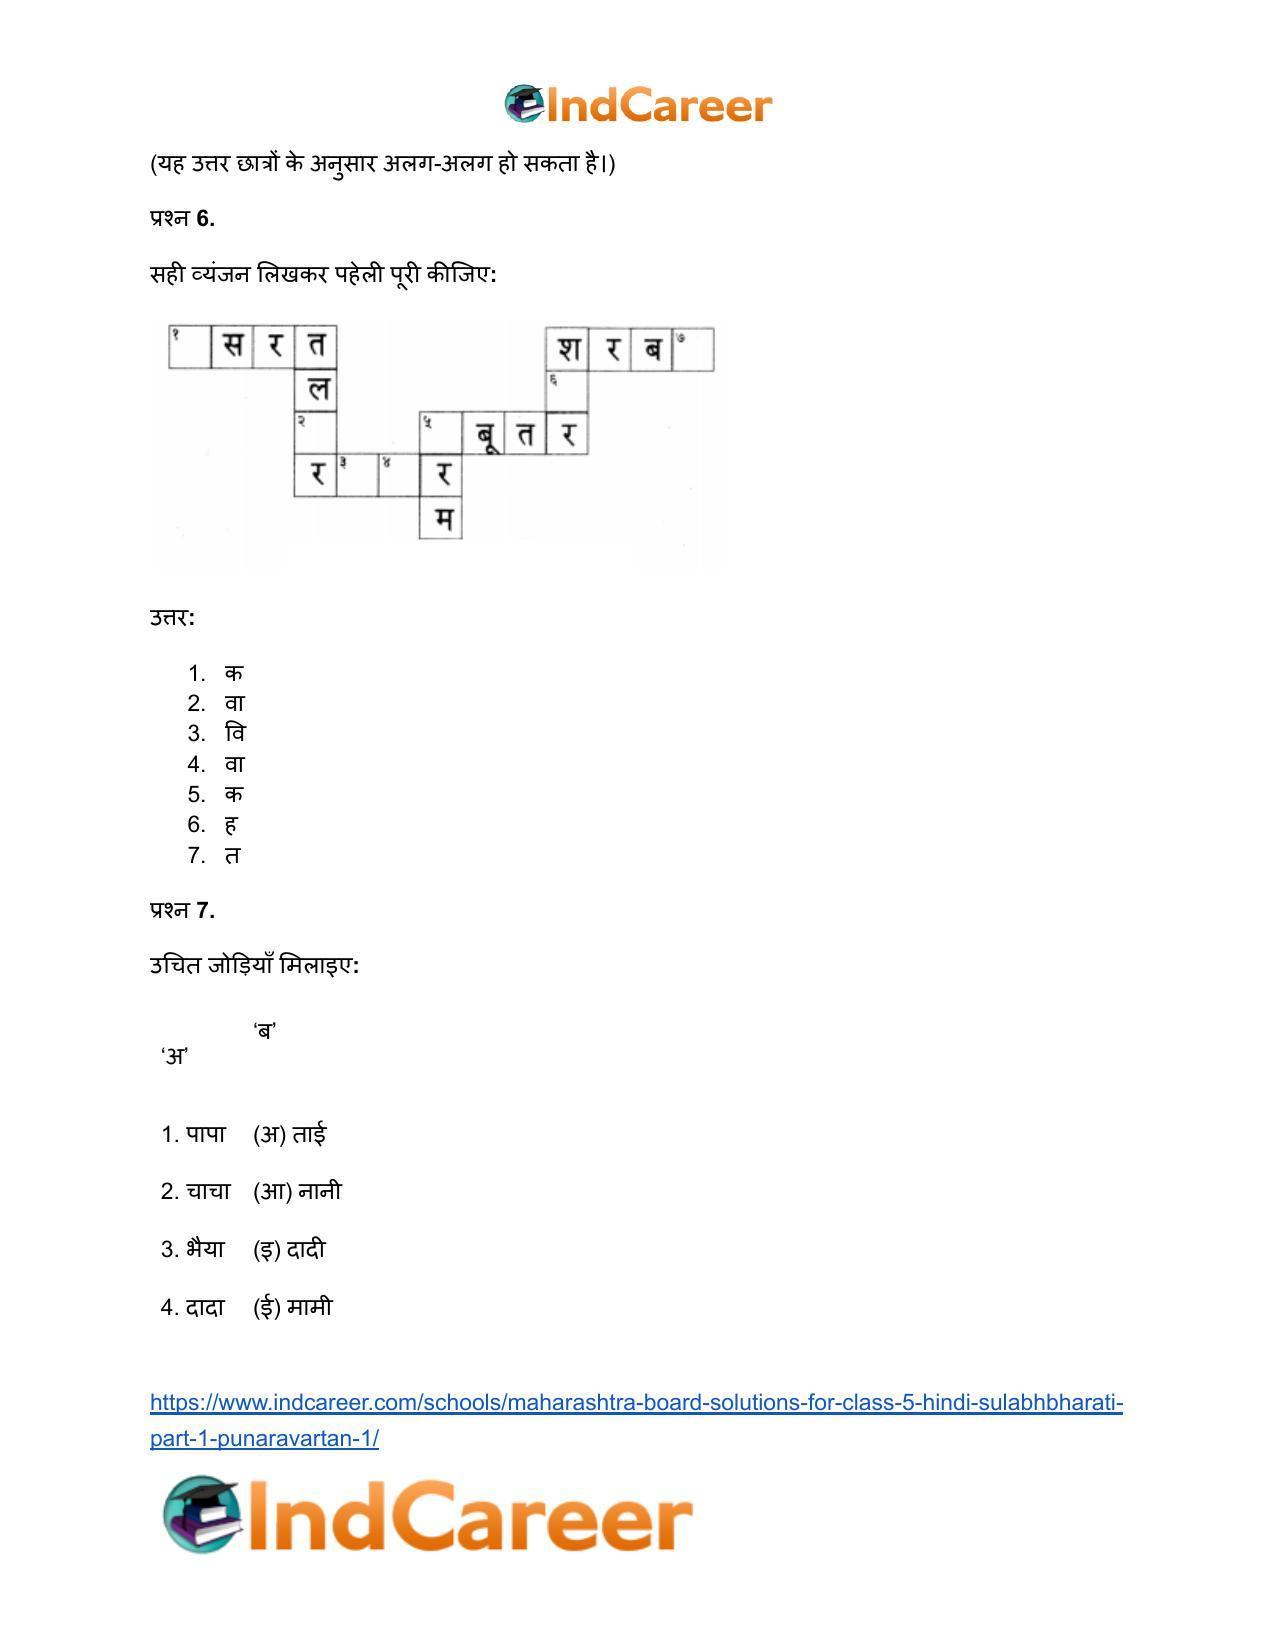 Maharashtra Board Solutions for Class 5- Hindi Sulabhbharati (Part 1): पुनरावर्तन १ - Page 7